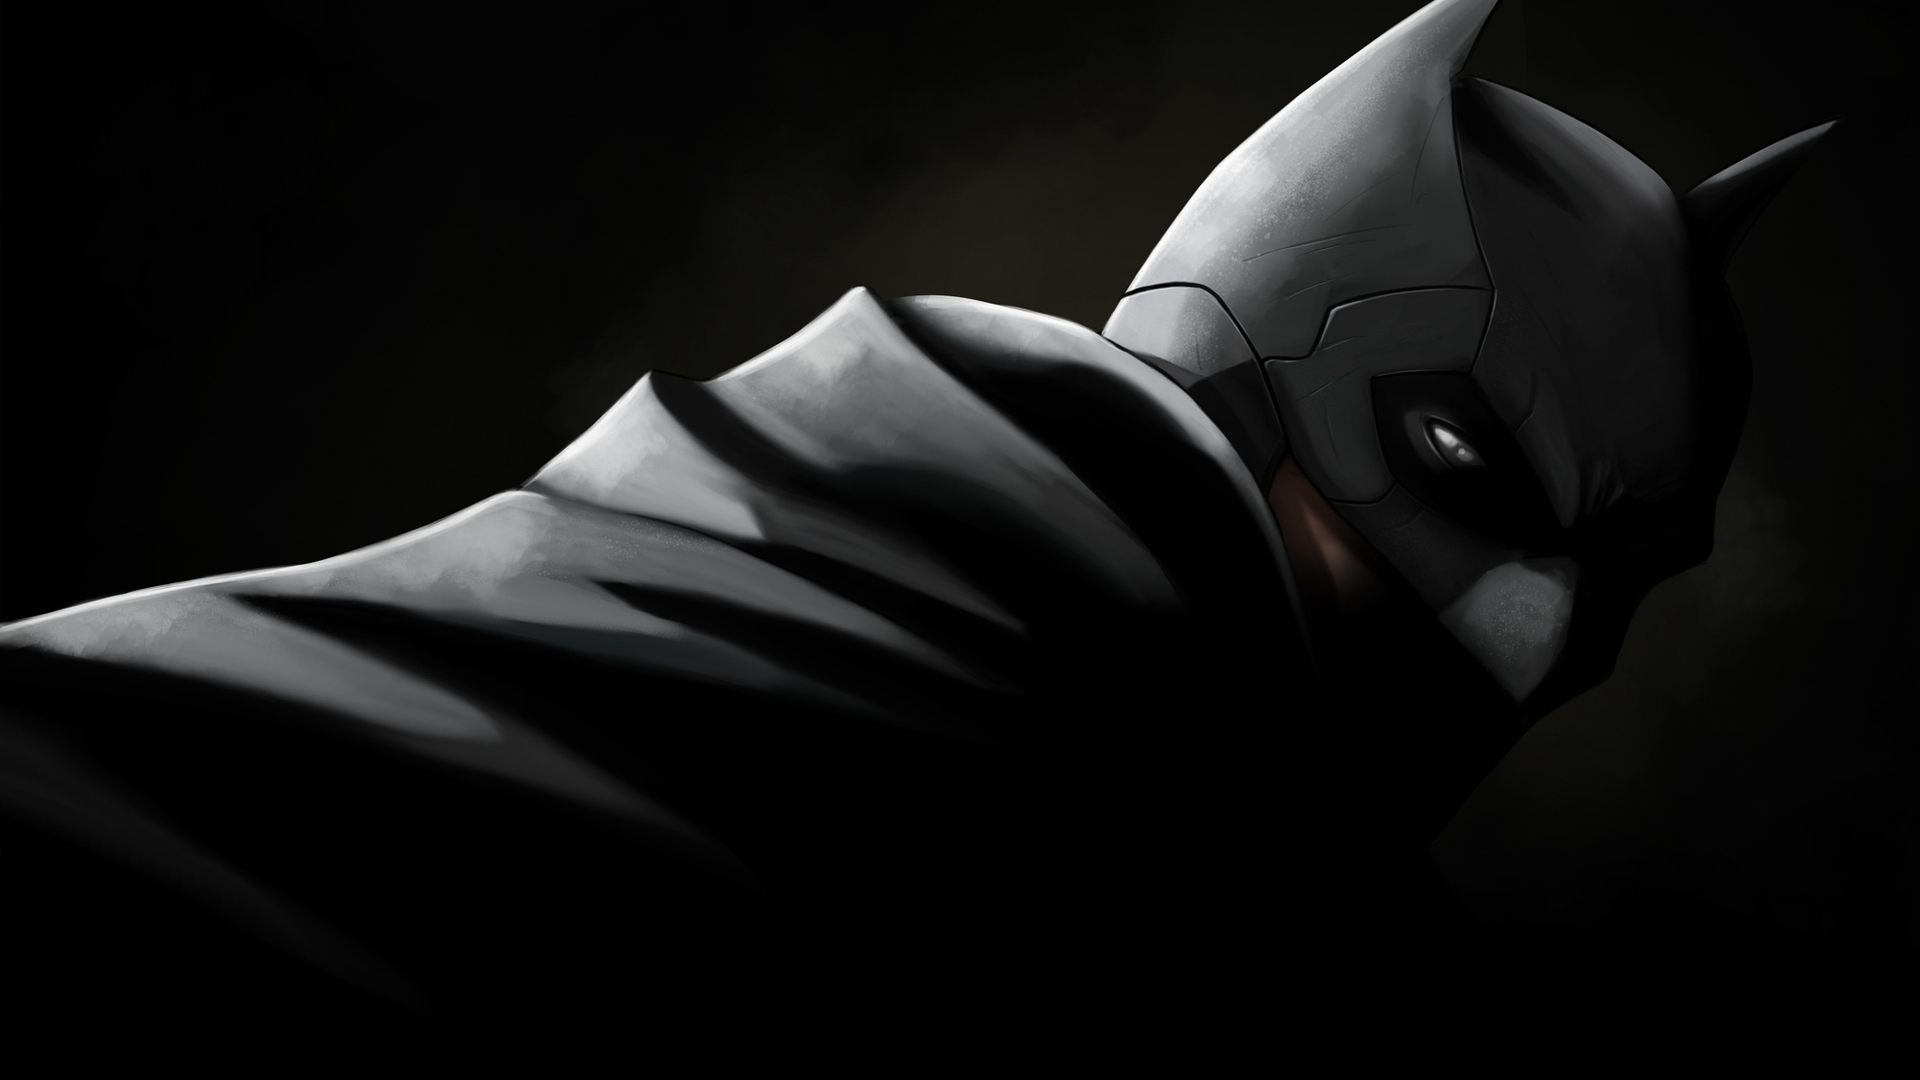 1920x1080 Batman Art 2018 HD Laptop Full HD 1080P HD 4k Wallpapers, Images,  Backgrounds, Photos and Pictures